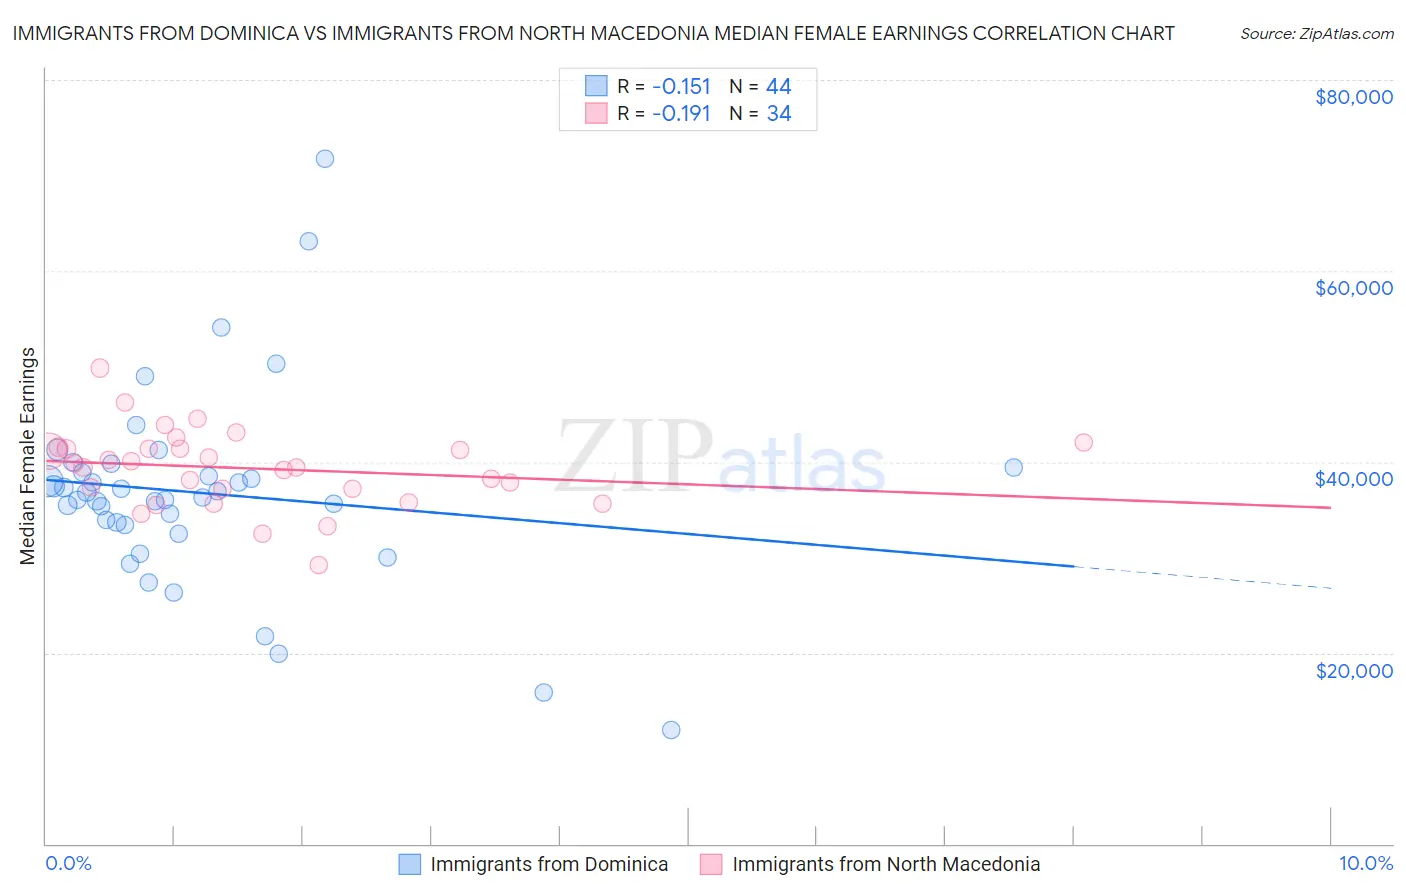 Immigrants from Dominica vs Immigrants from North Macedonia Median Female Earnings